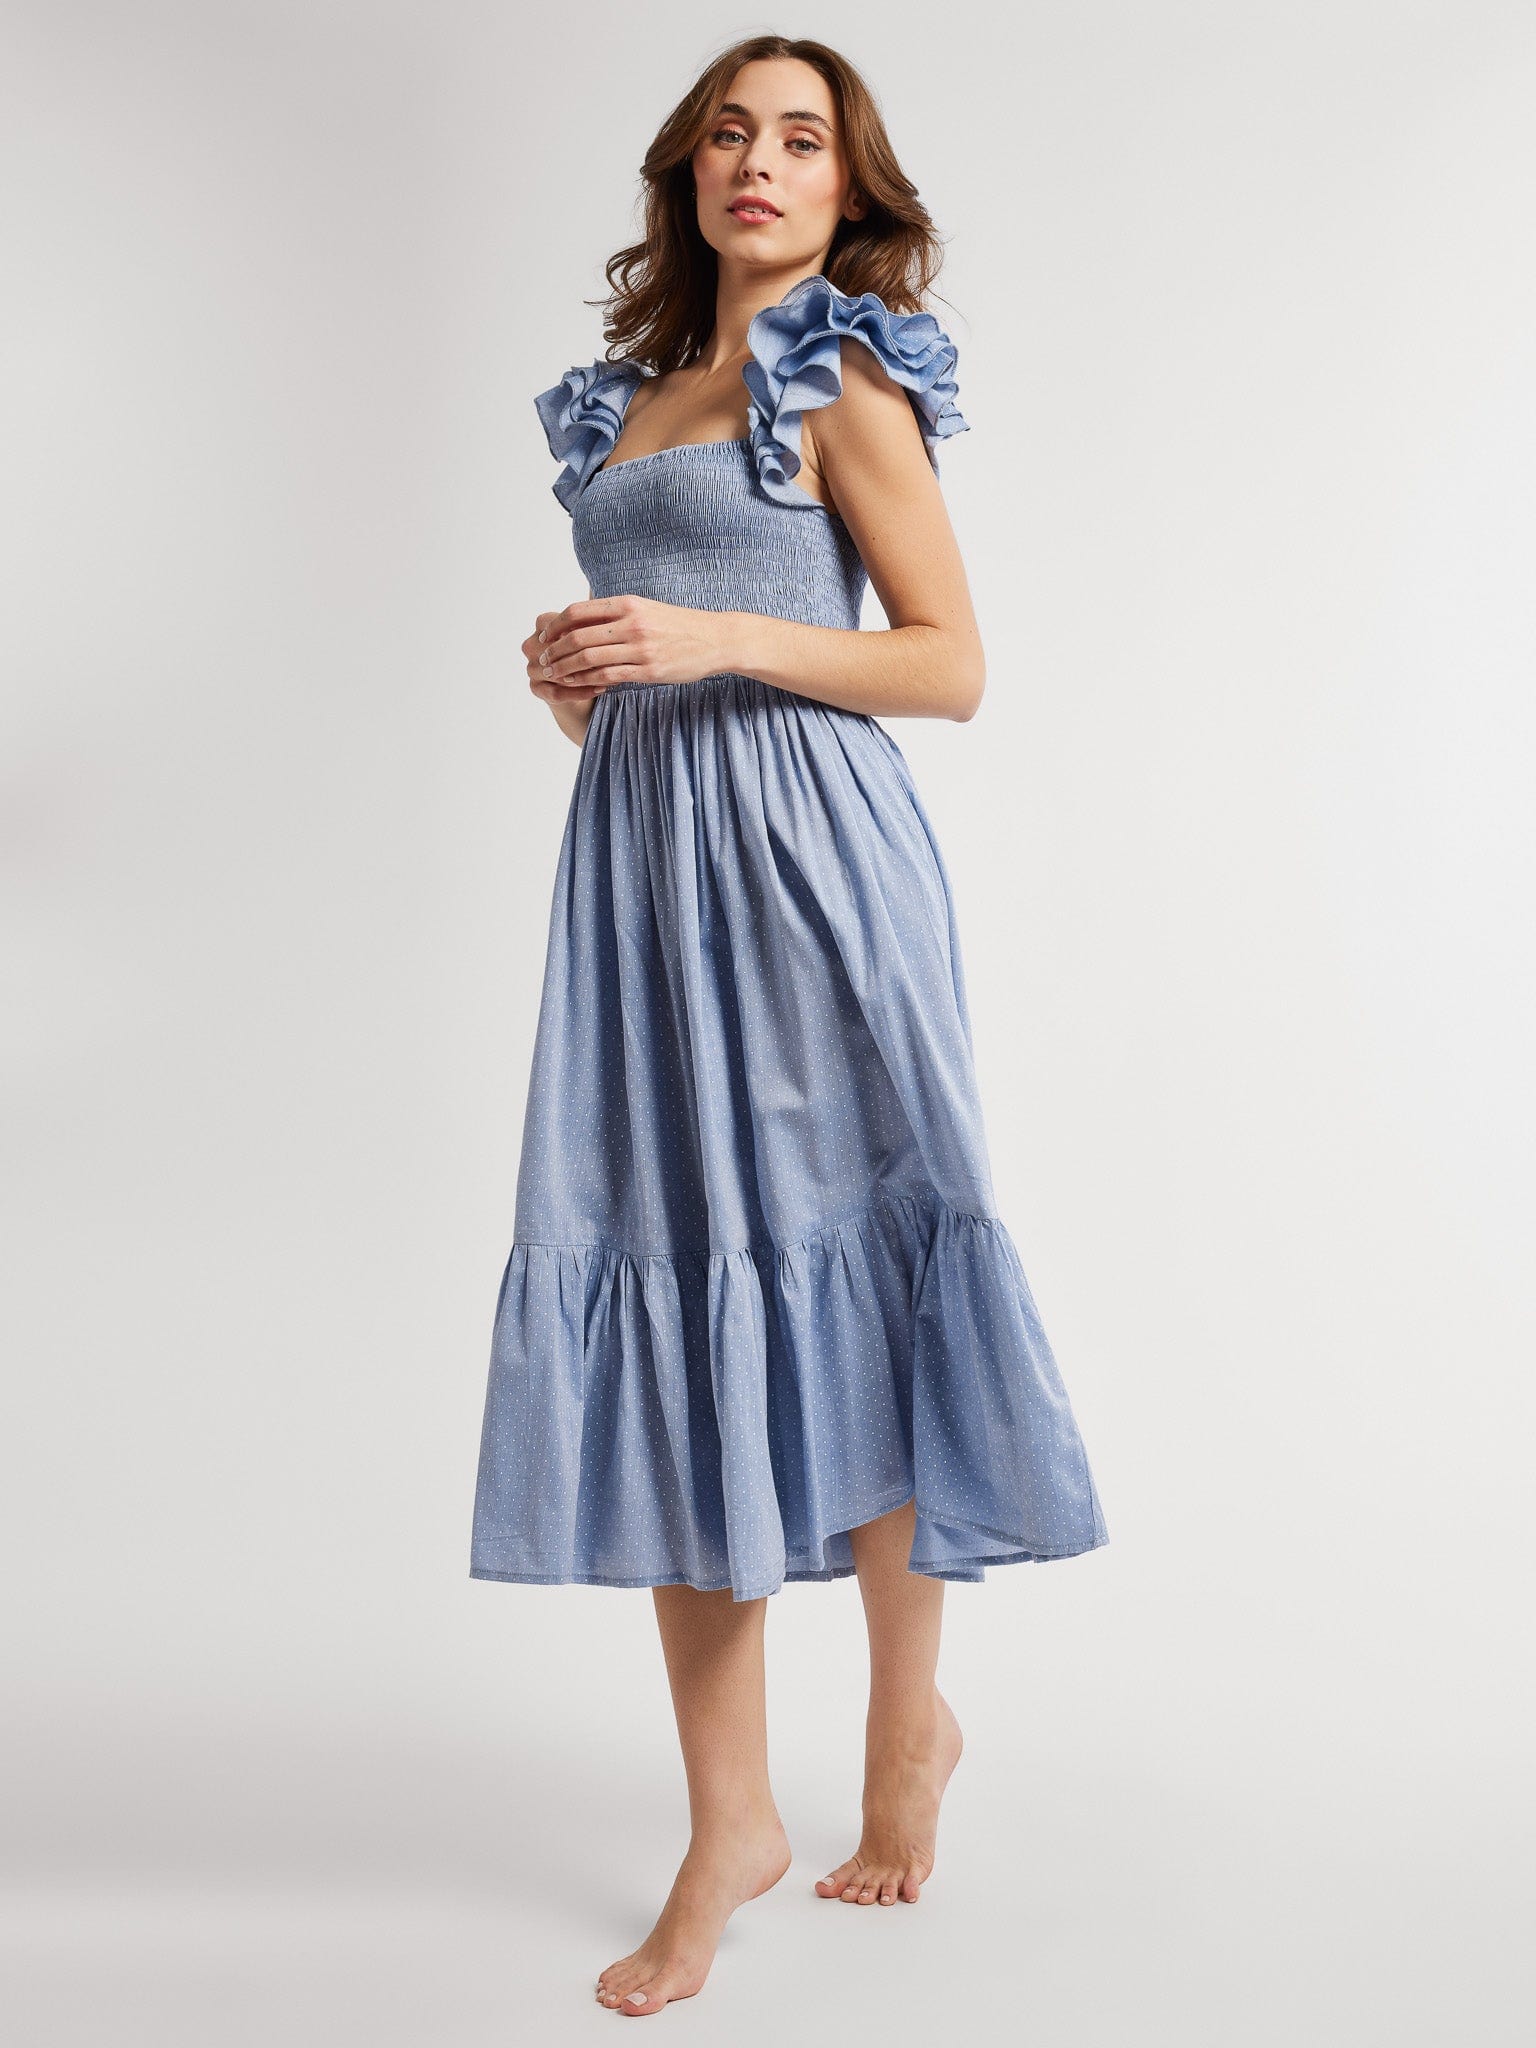 MILLE Clothing Olympia Dress in Chambray Polka Dot